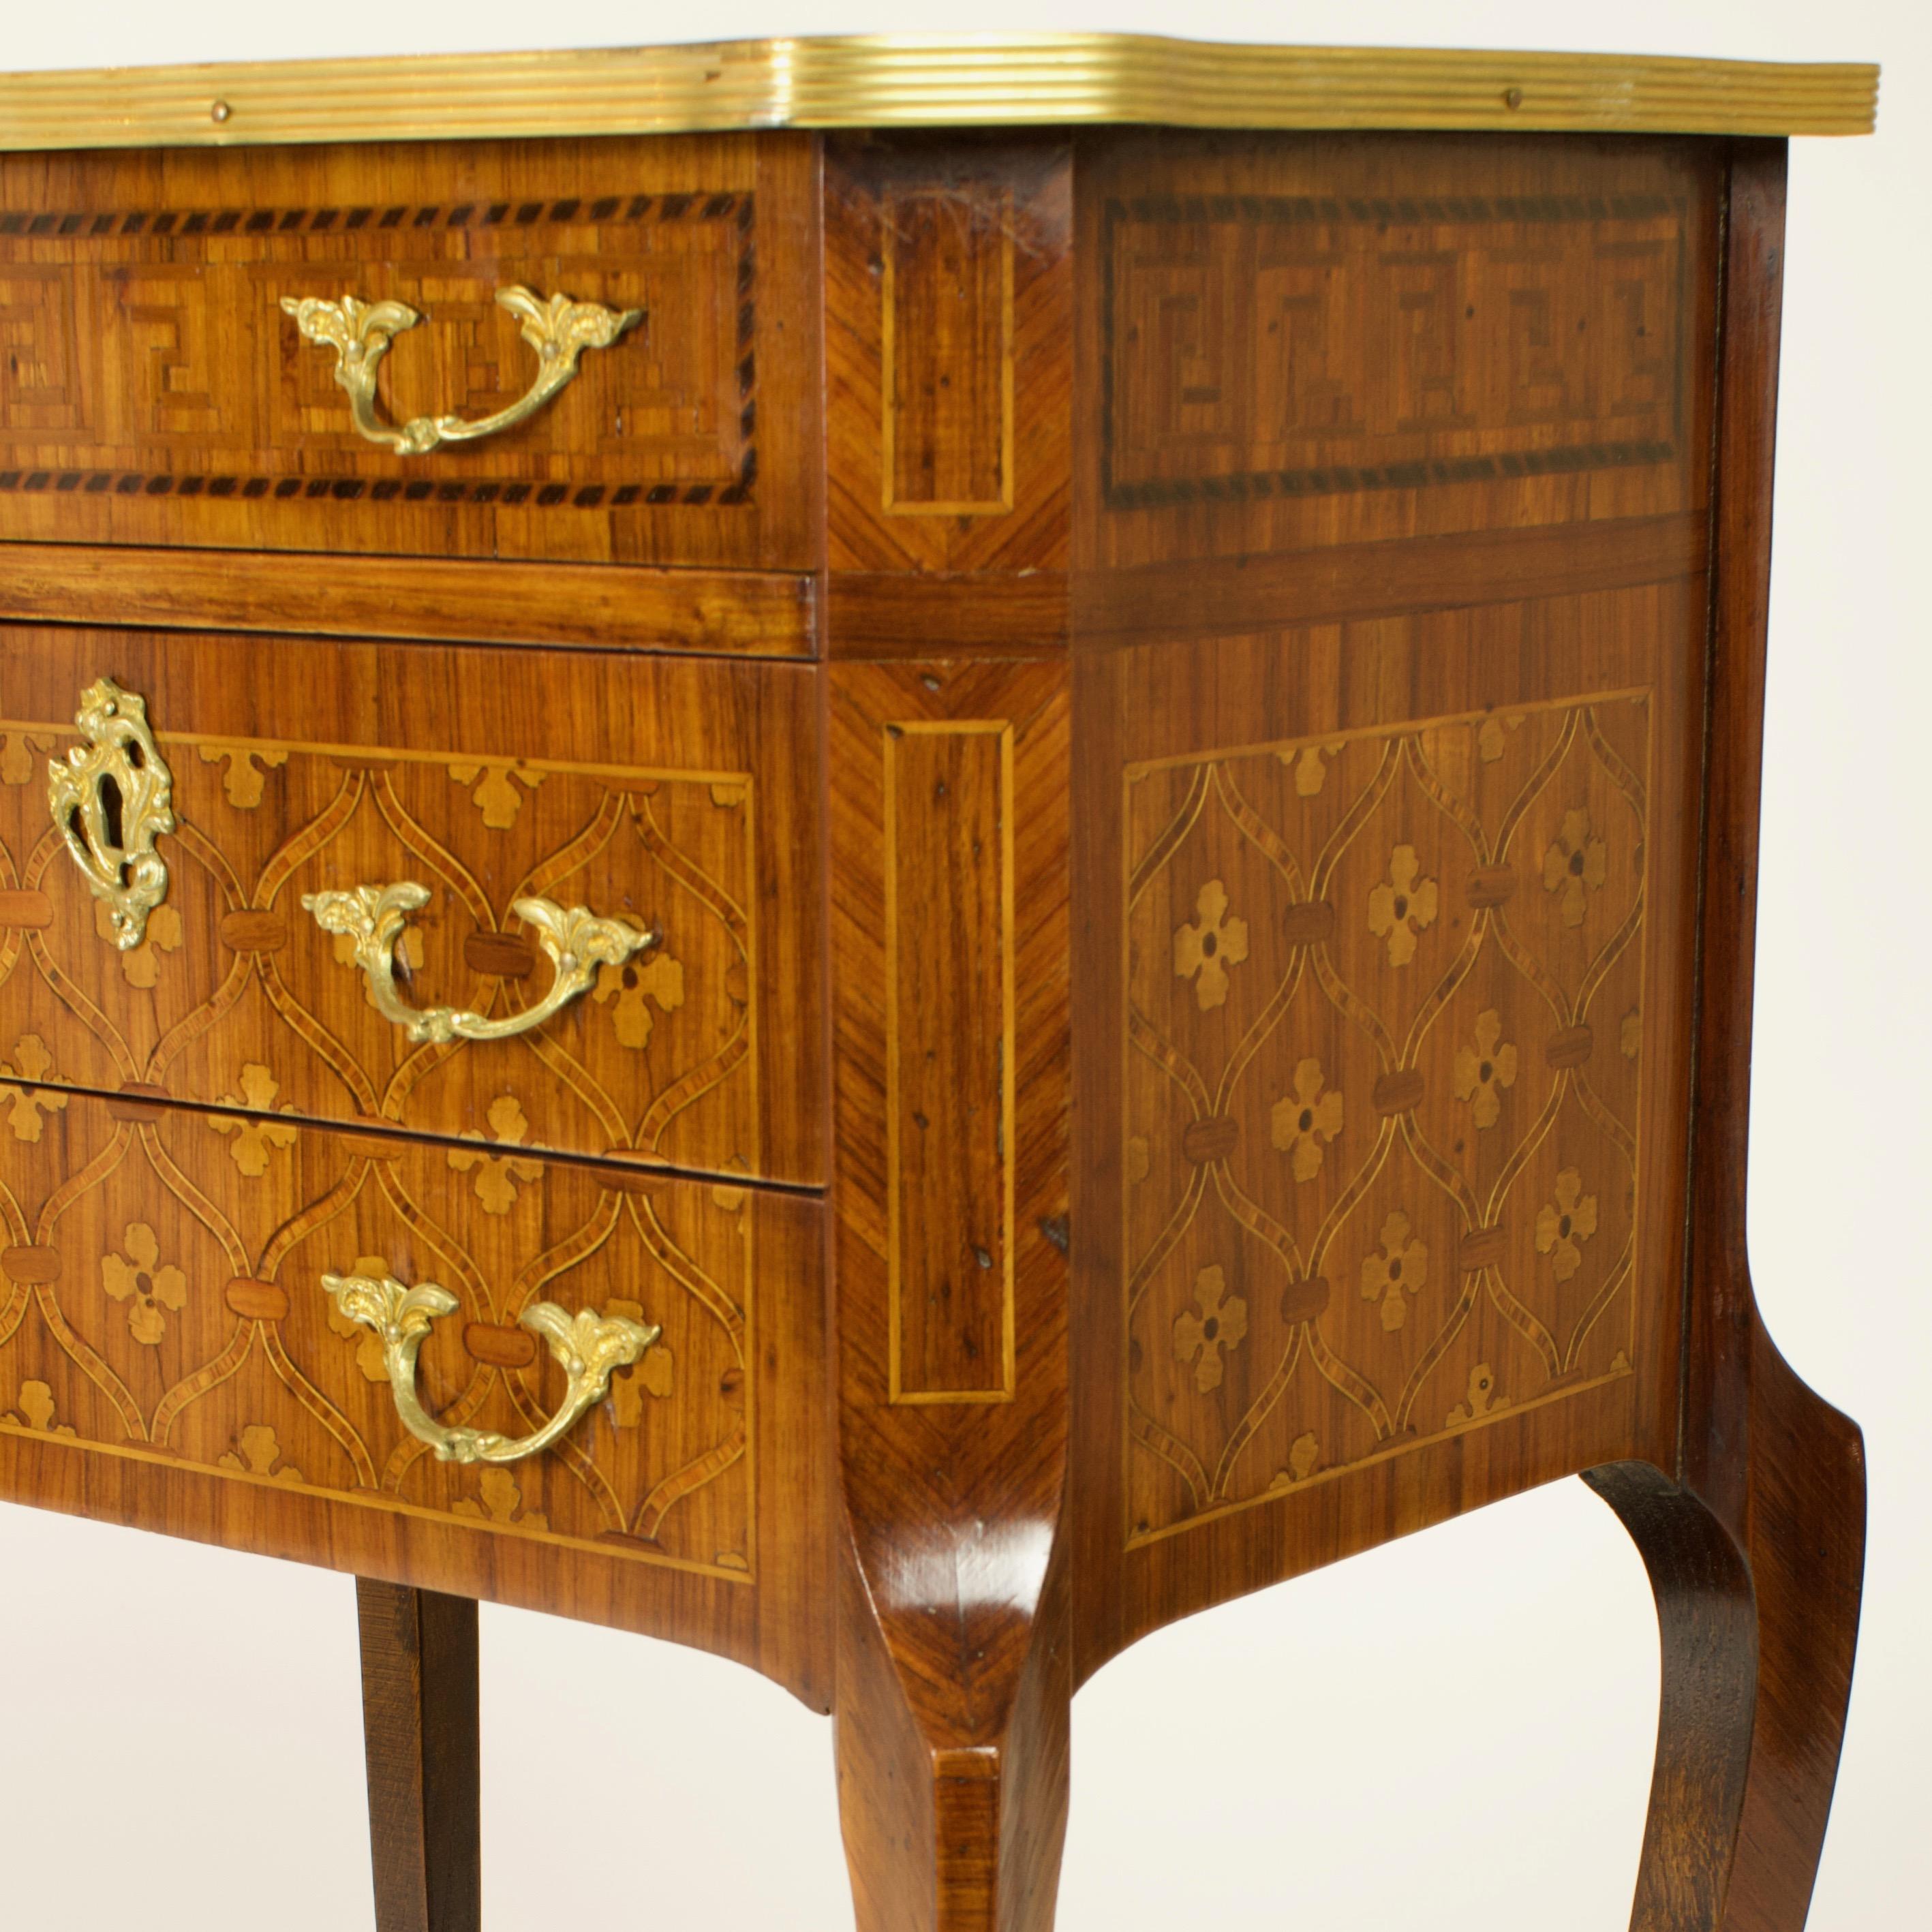 Late 19th Century French Transition/Louis XVI Marquetry a la Reine Side Table For Sale 6